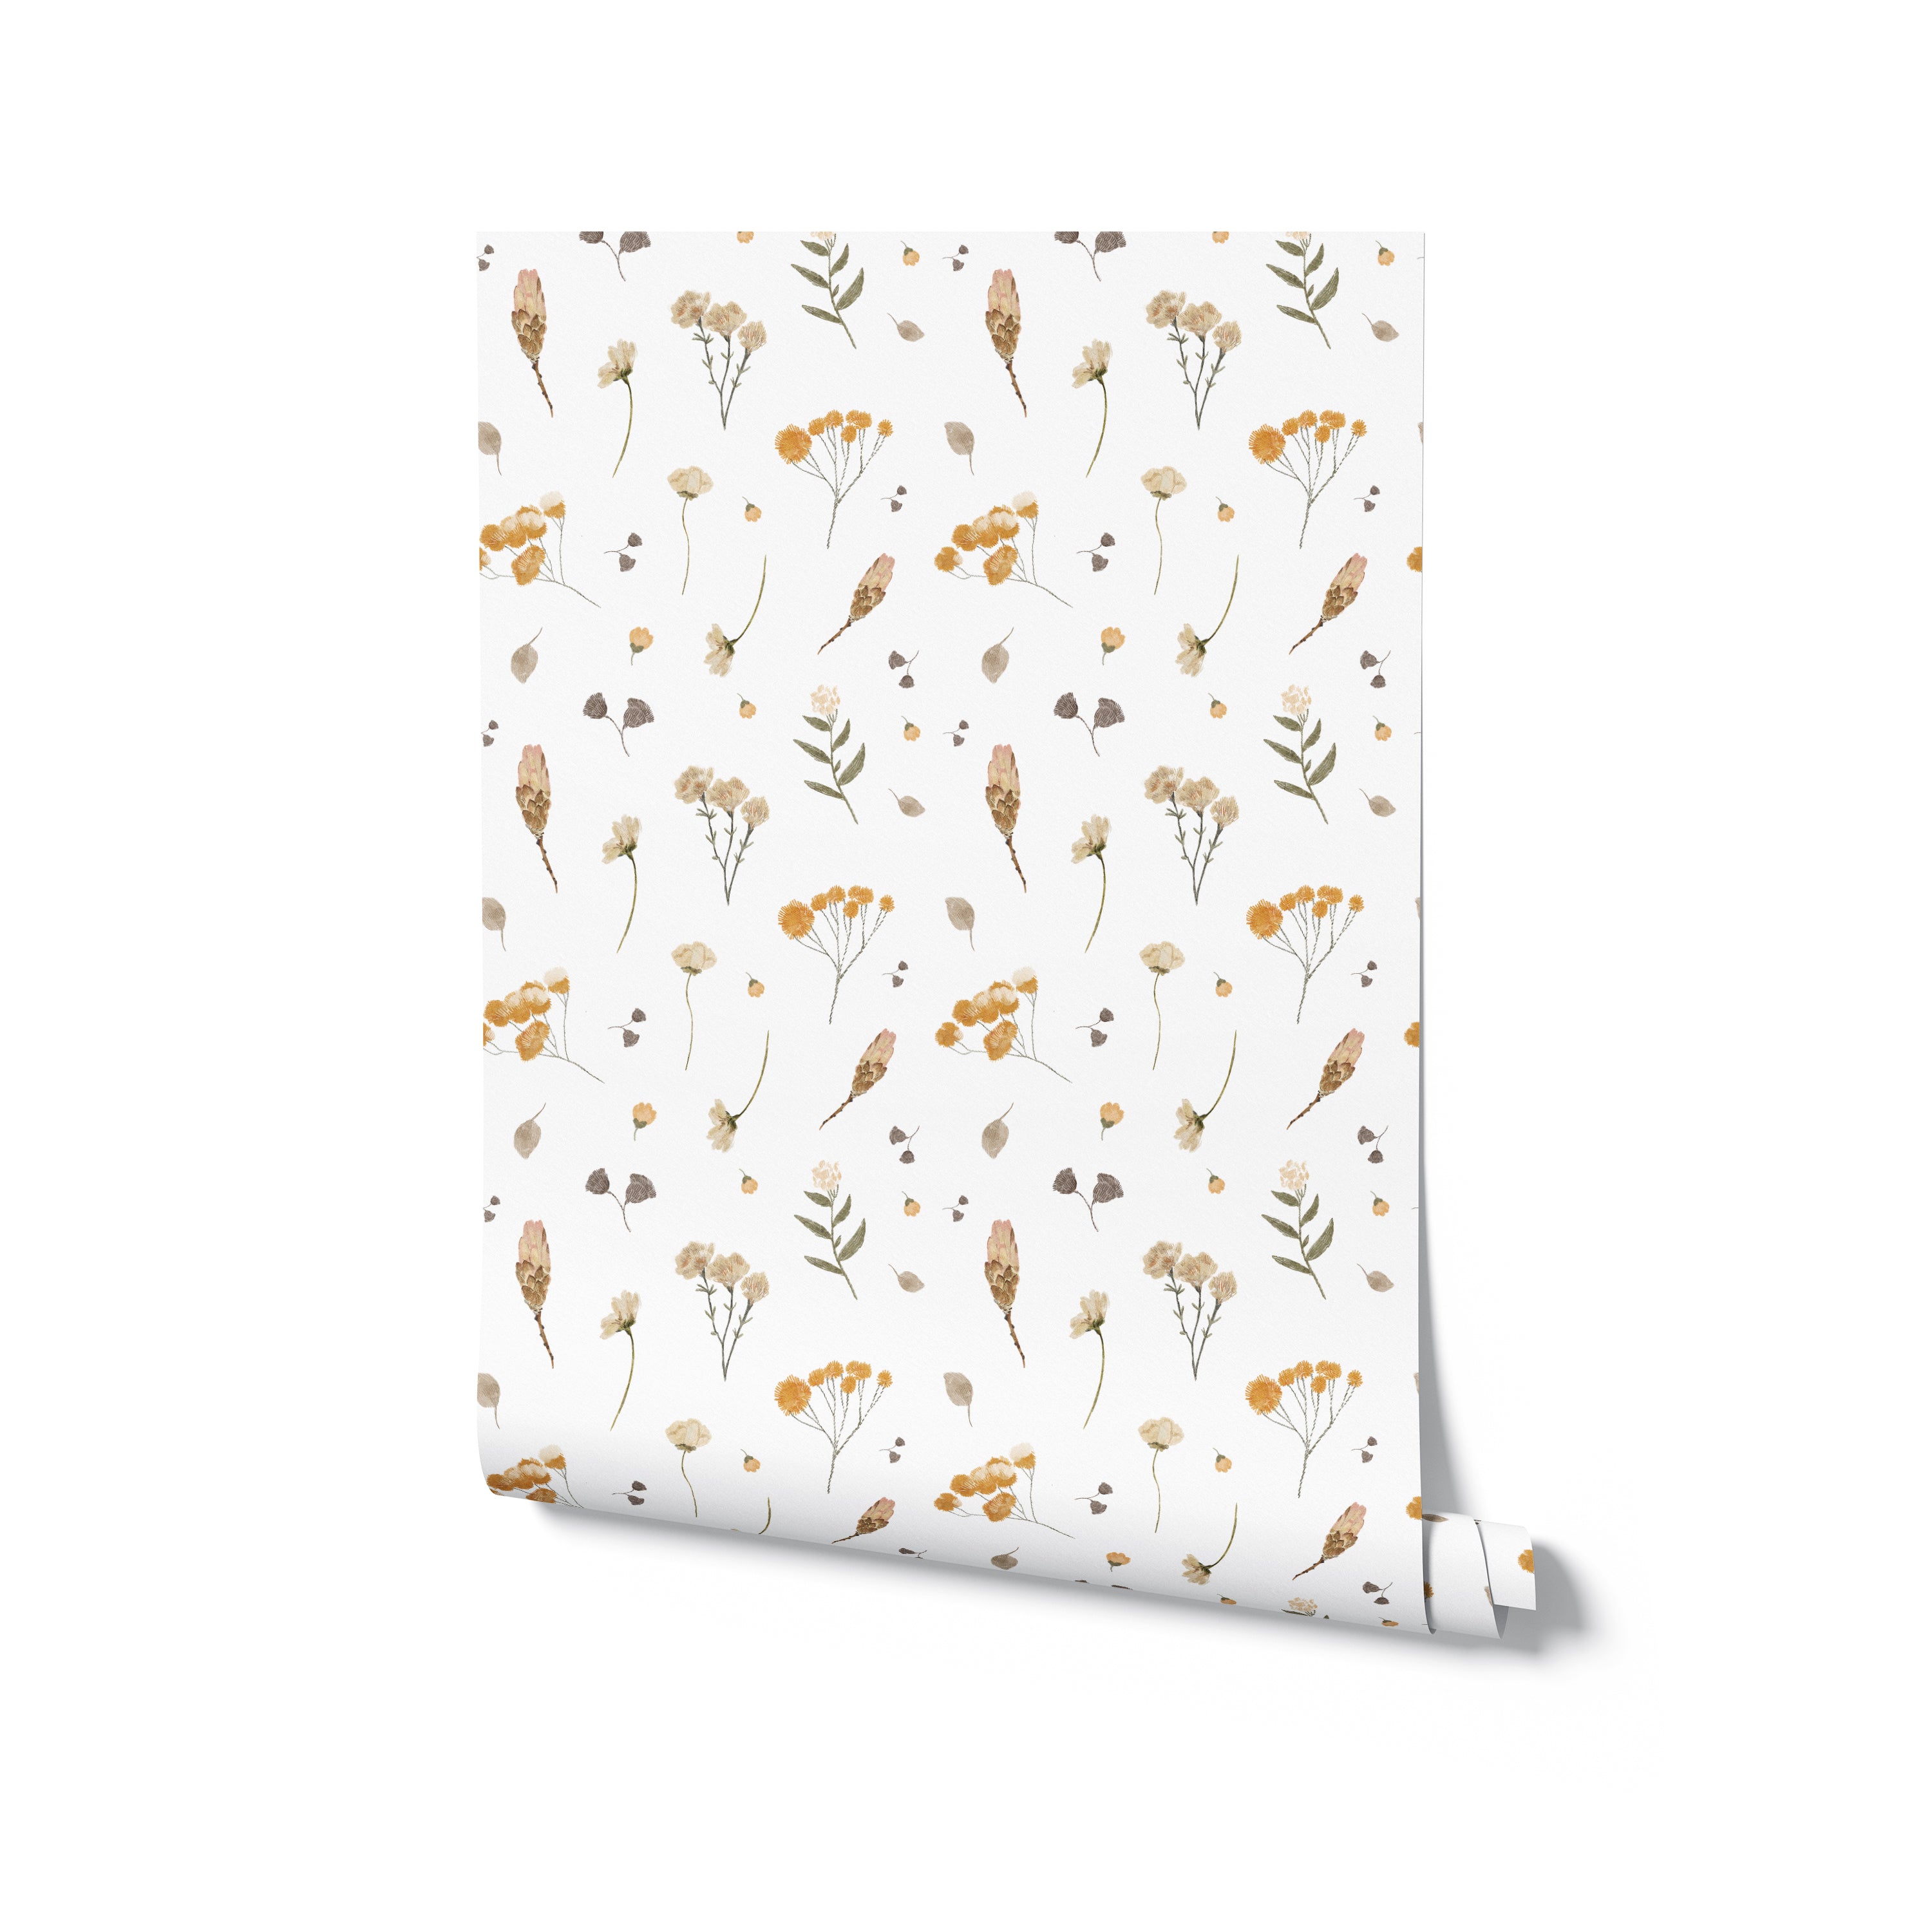 A rolled-up piece of Buttercup Fields Wallpaper with its edge slightly unfurled, showing off the scattered yellow buttercups and gray foliage pattern, ready to brighten up a room with its light and airy design.